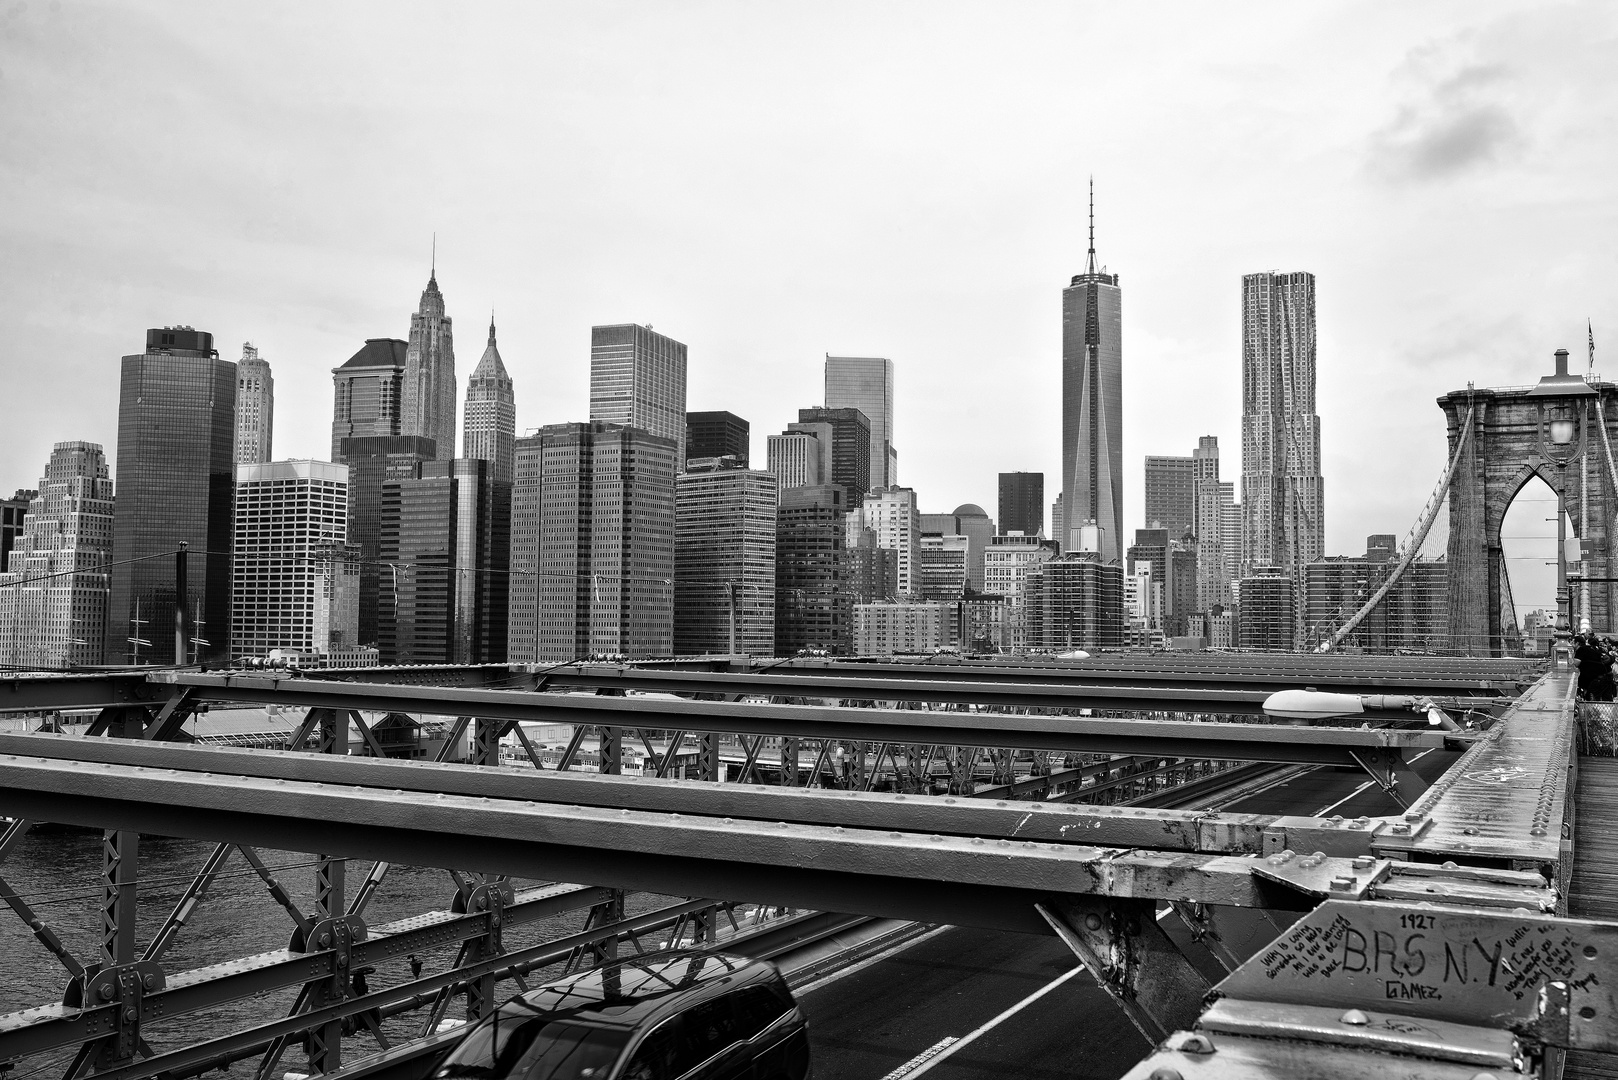 A view from the Brooklyn Bridge to the Manhattan Skyline